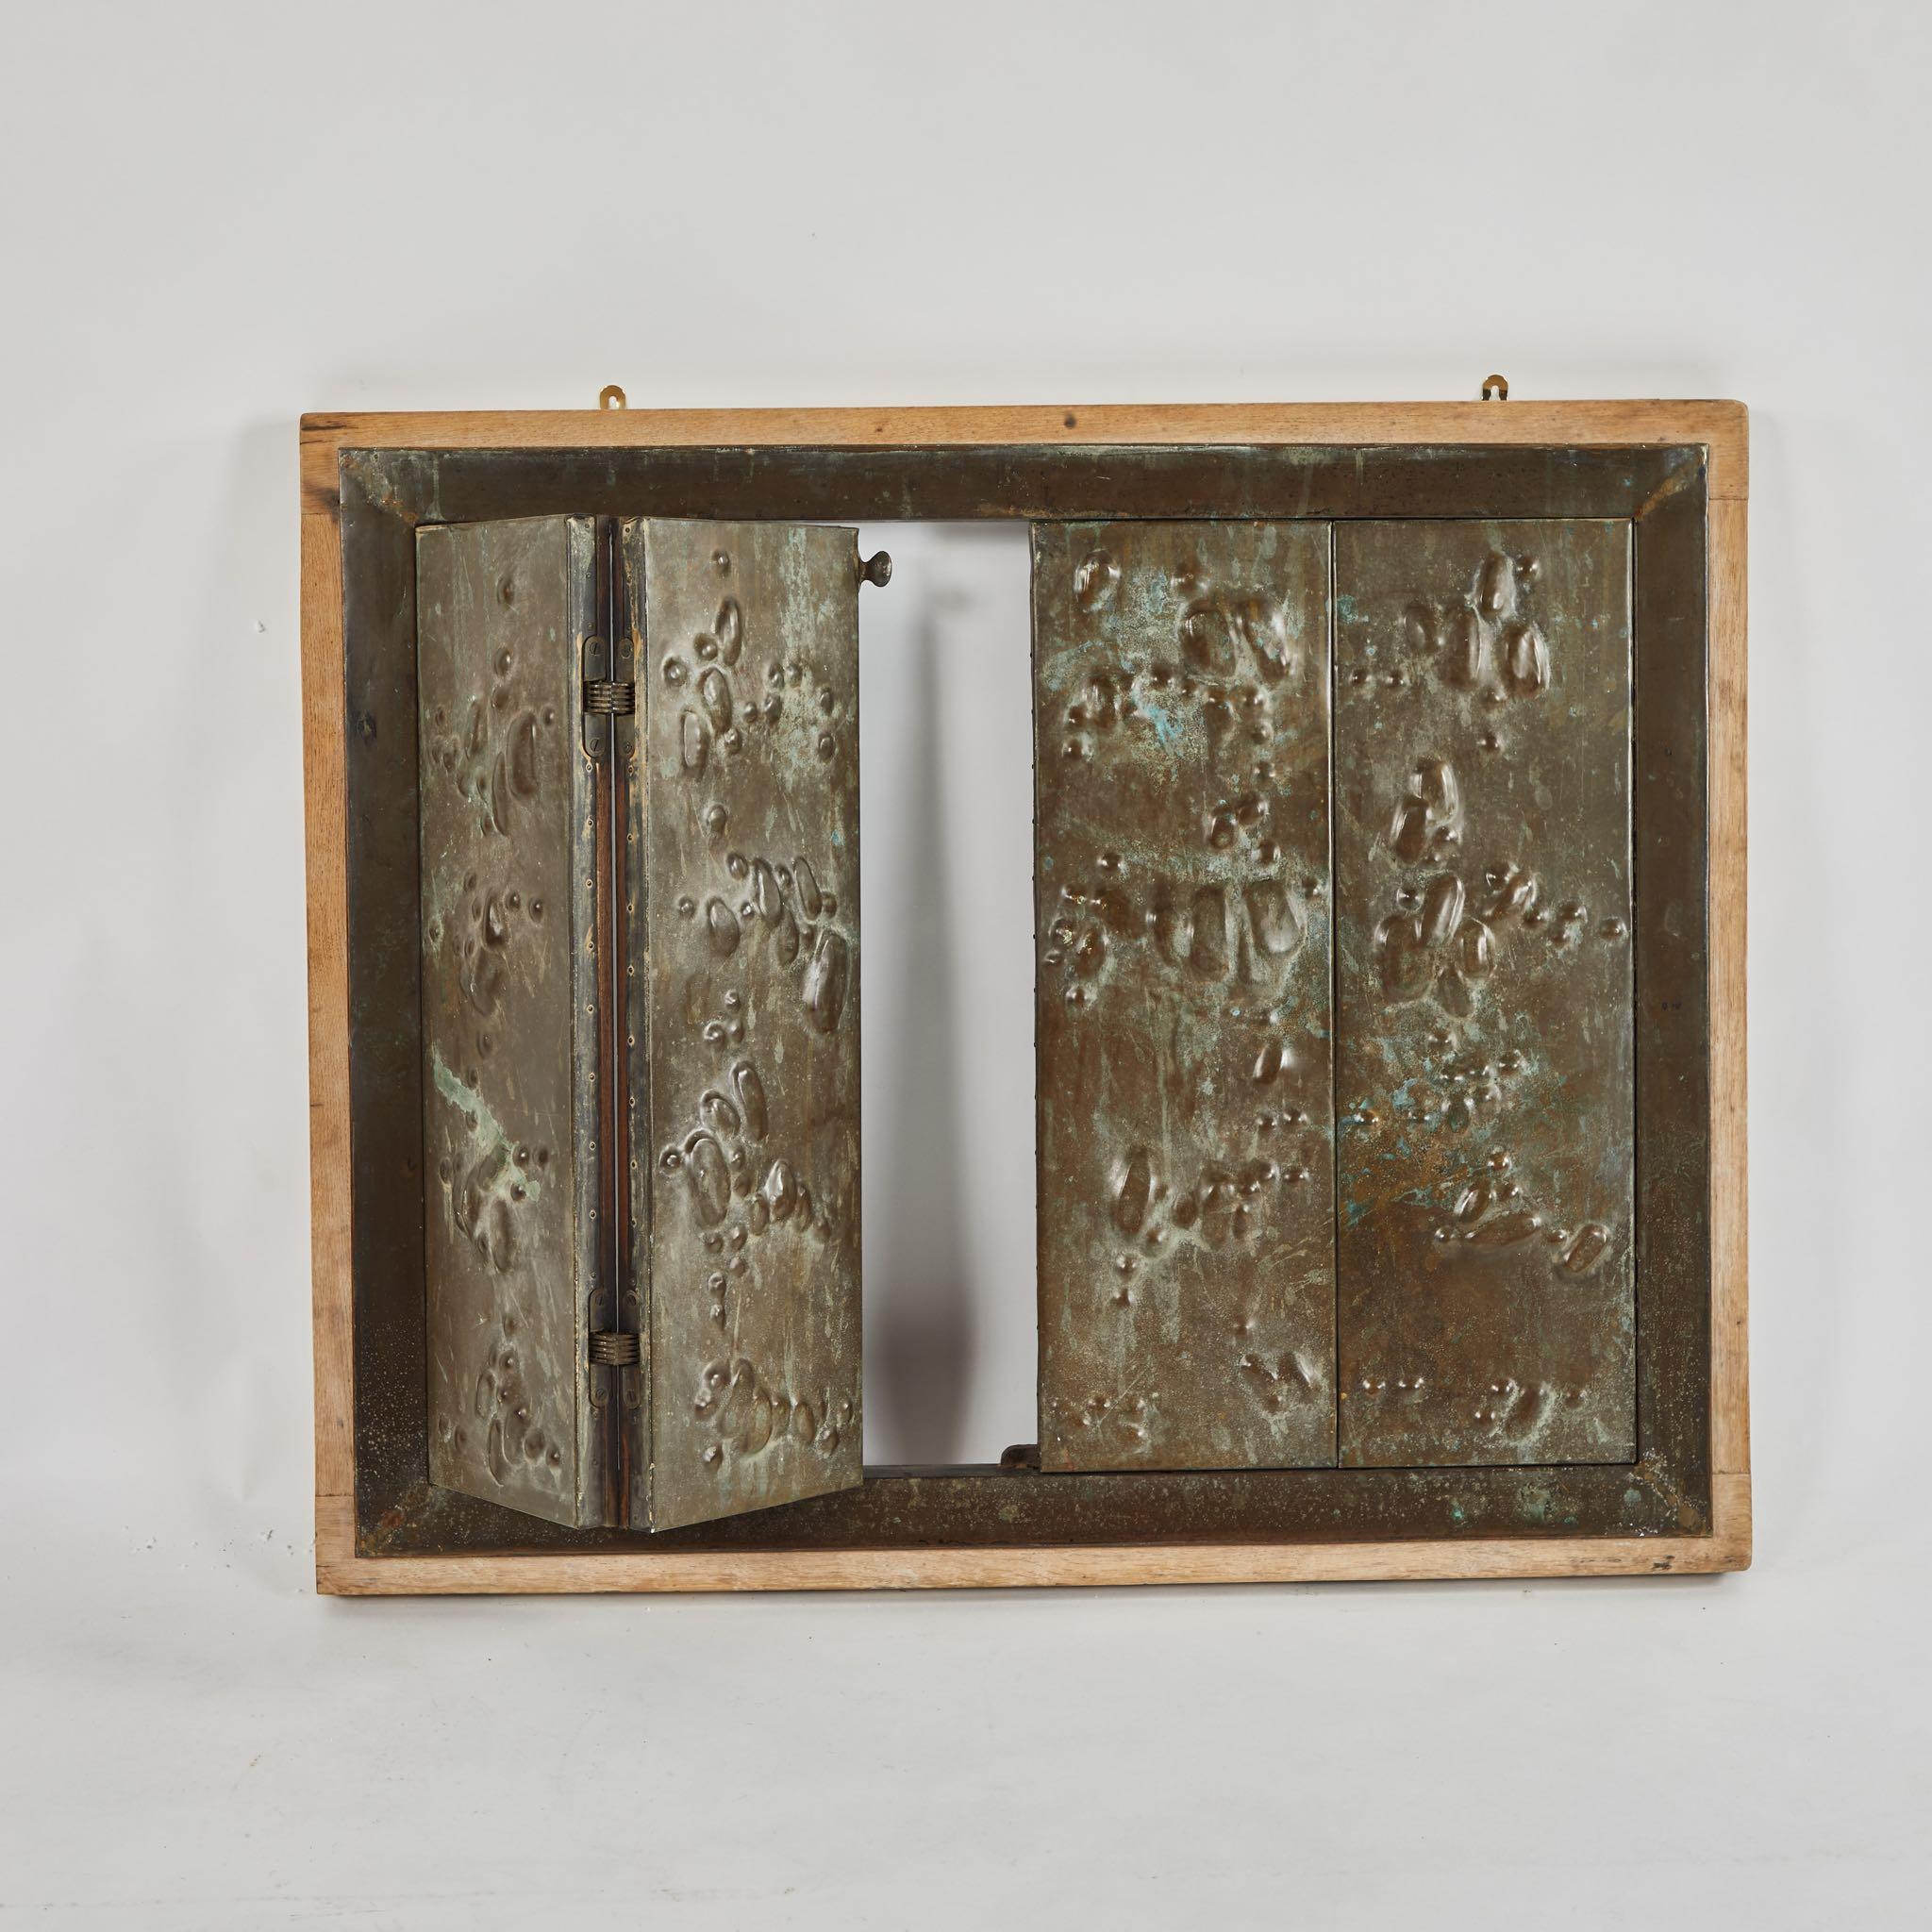 A panel on hinges in metal, originating in England, circa 1910.